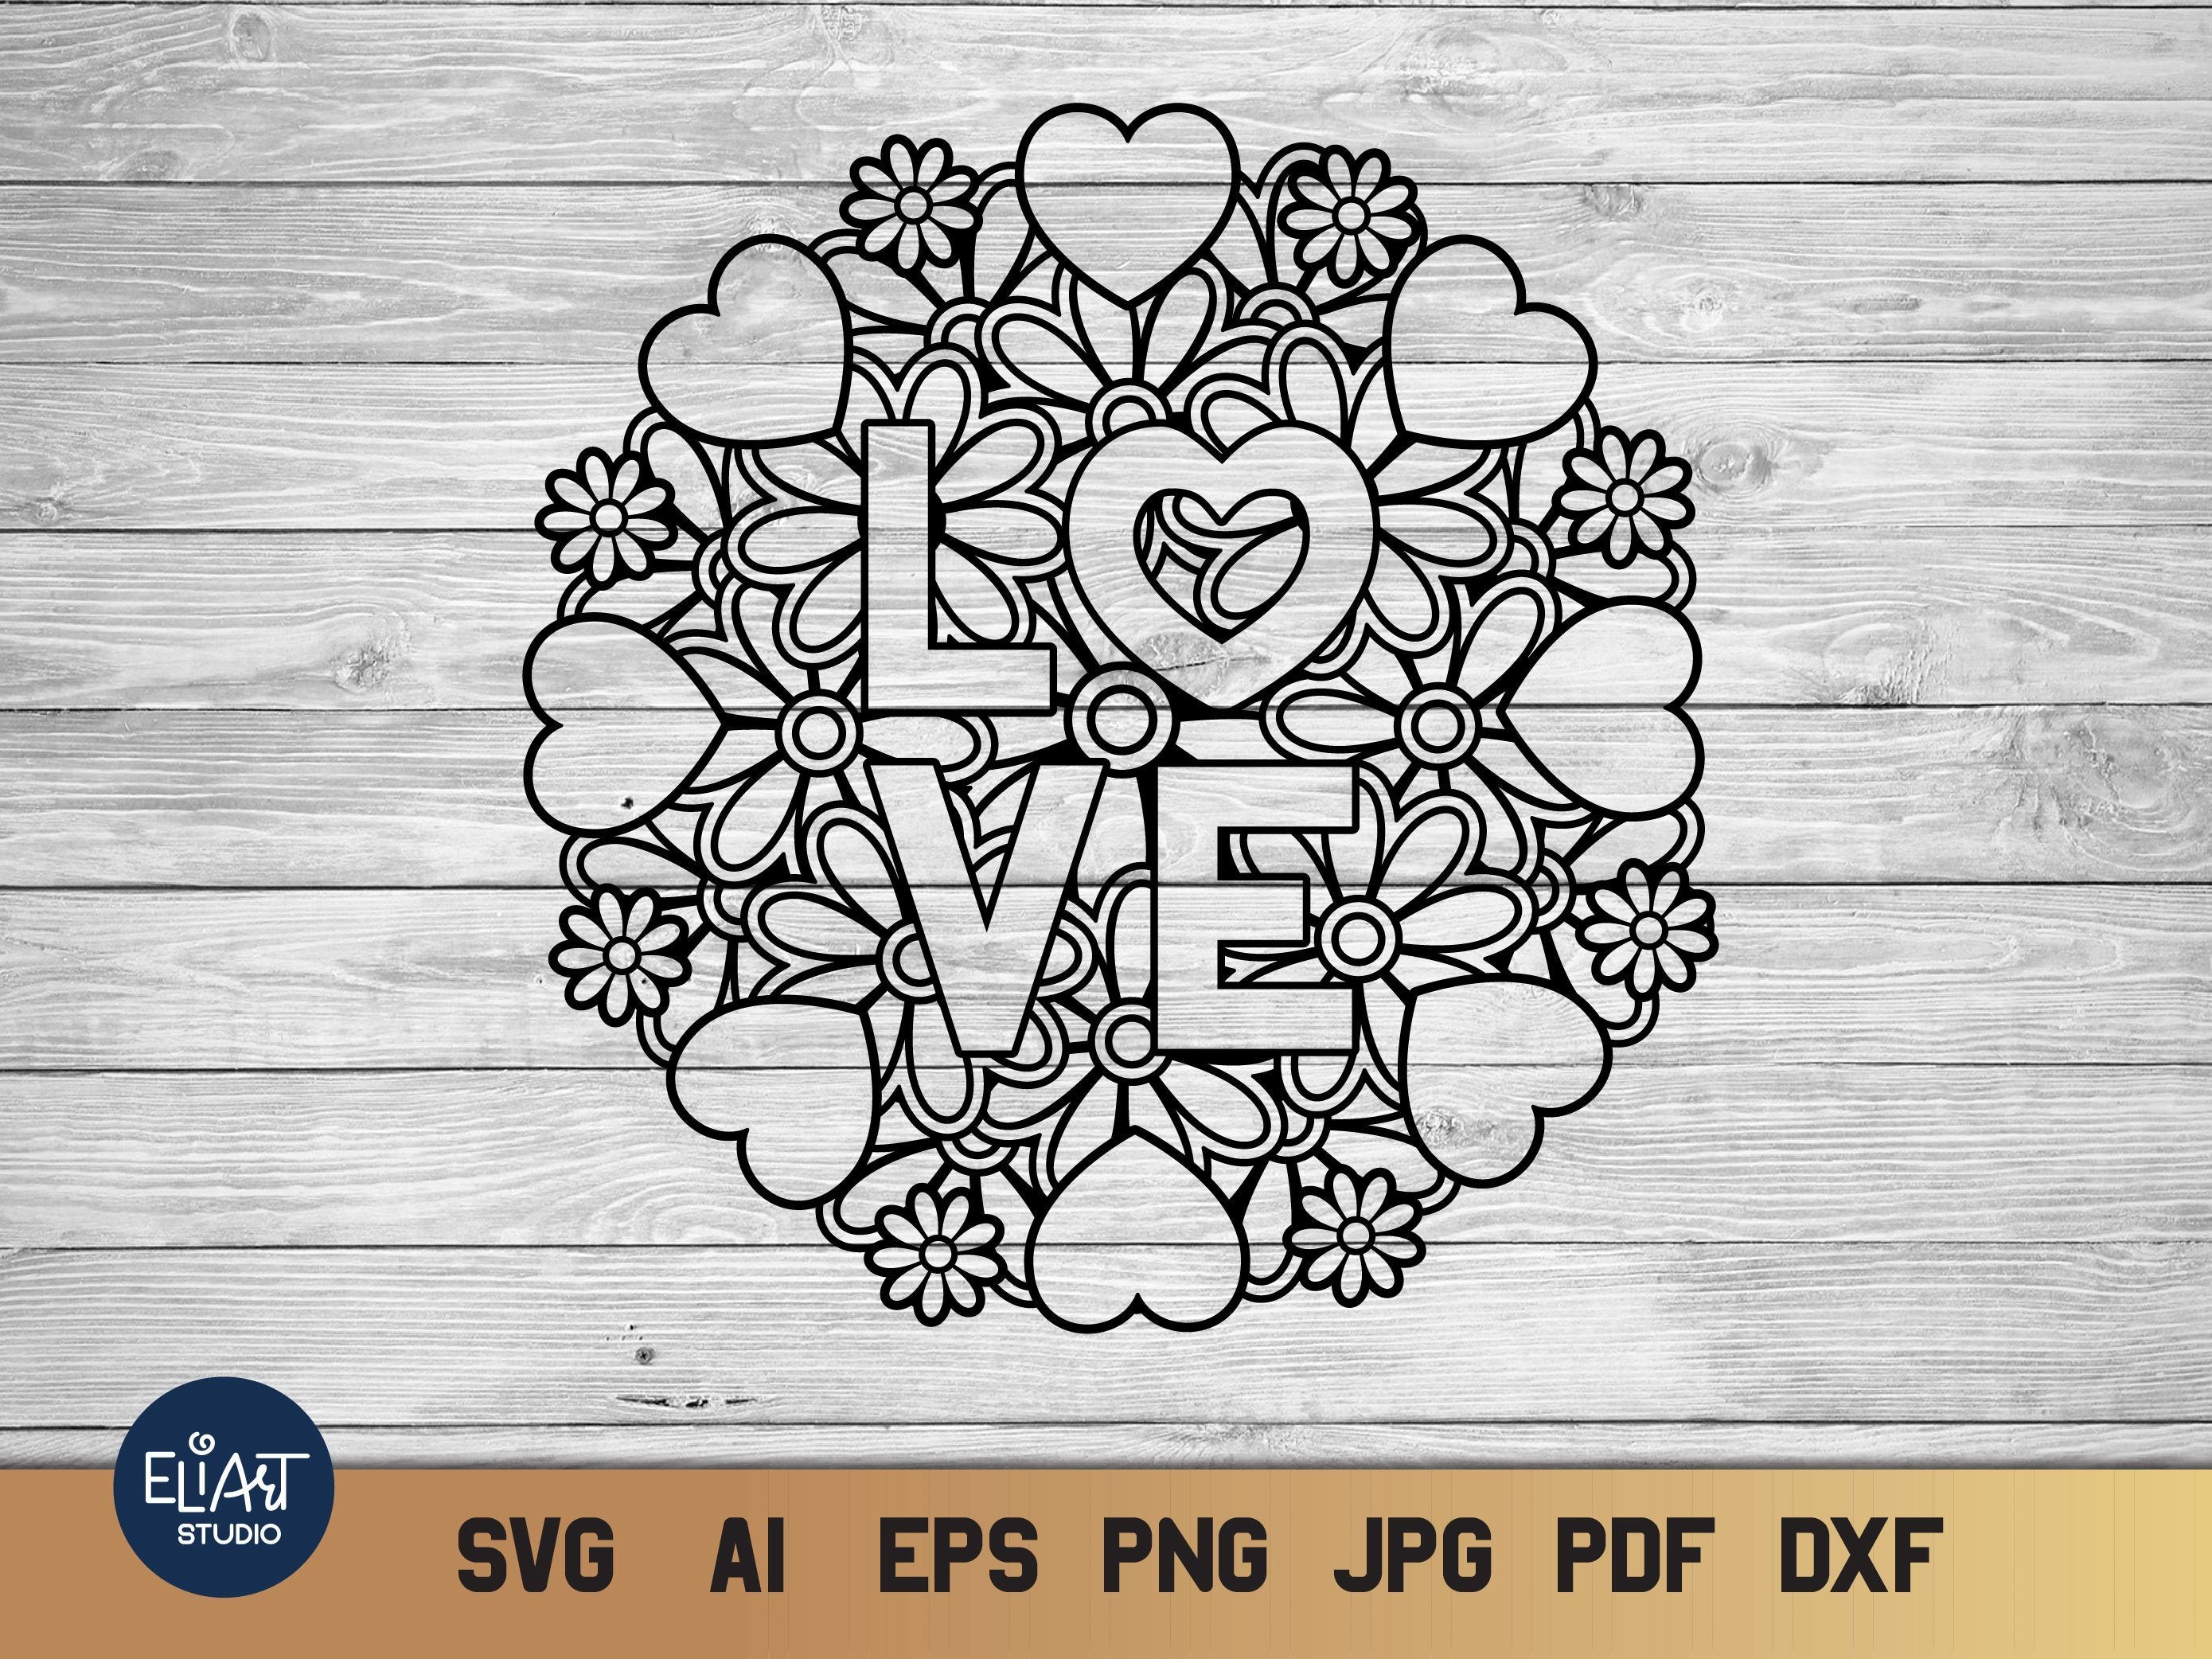 Download Clip Art 3d Layered Love And Butterfly Mandala Svg Valentine S Day Dxf Files For Cricut Silhouette Art Collectibles